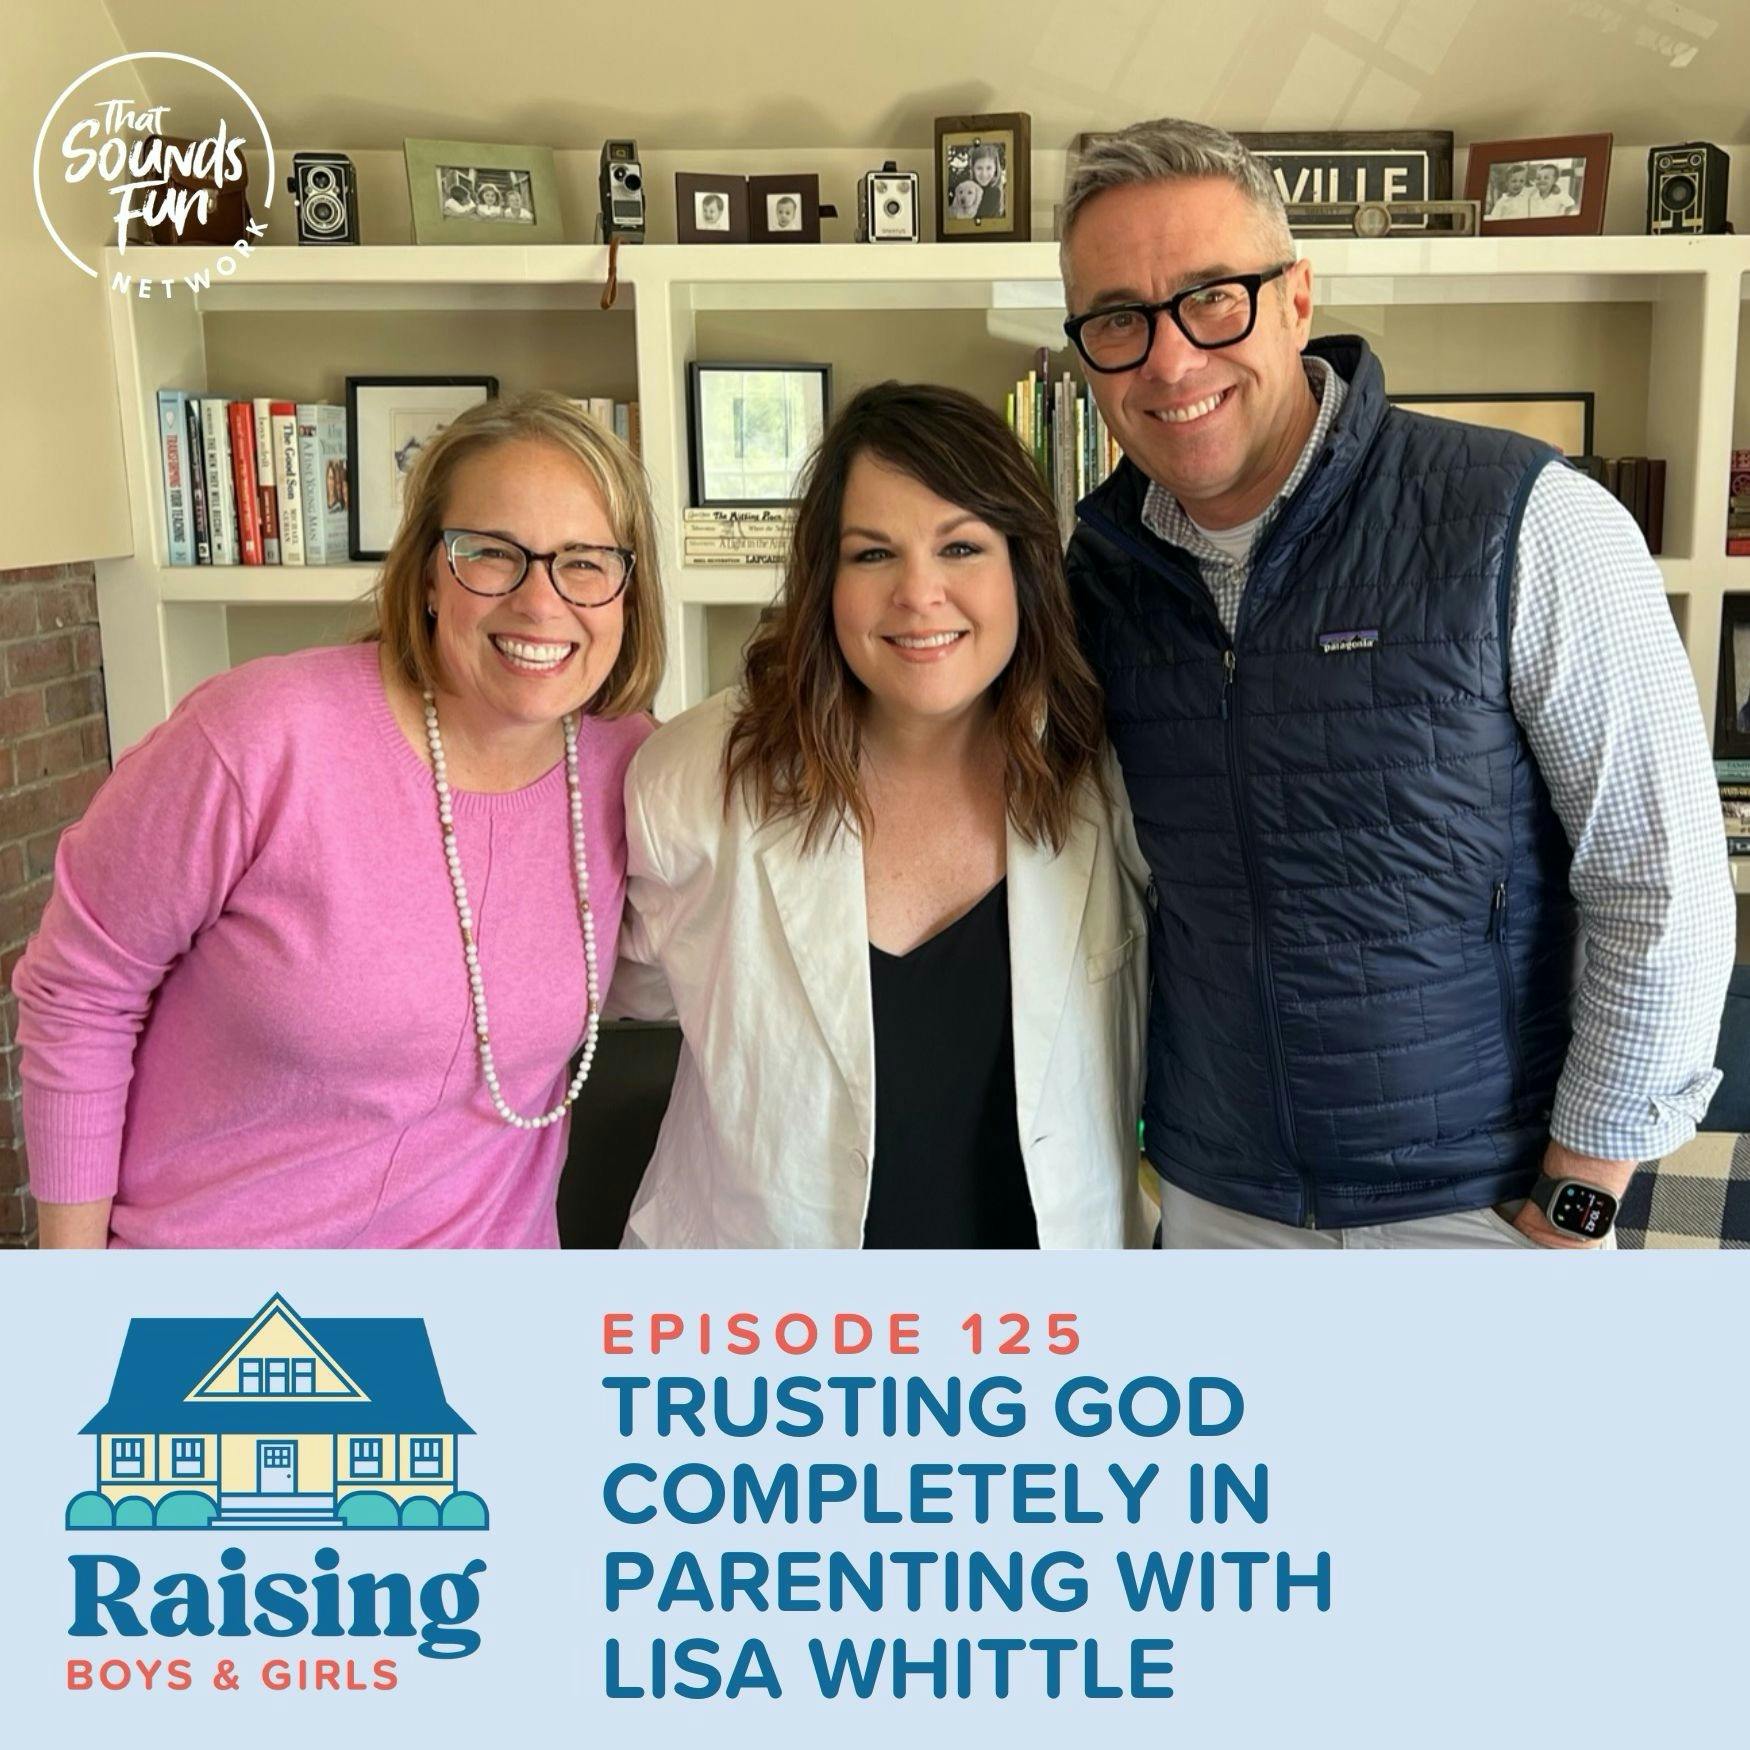 Episode 125: Trusting God Completely in Parenting with Lisa Whittle